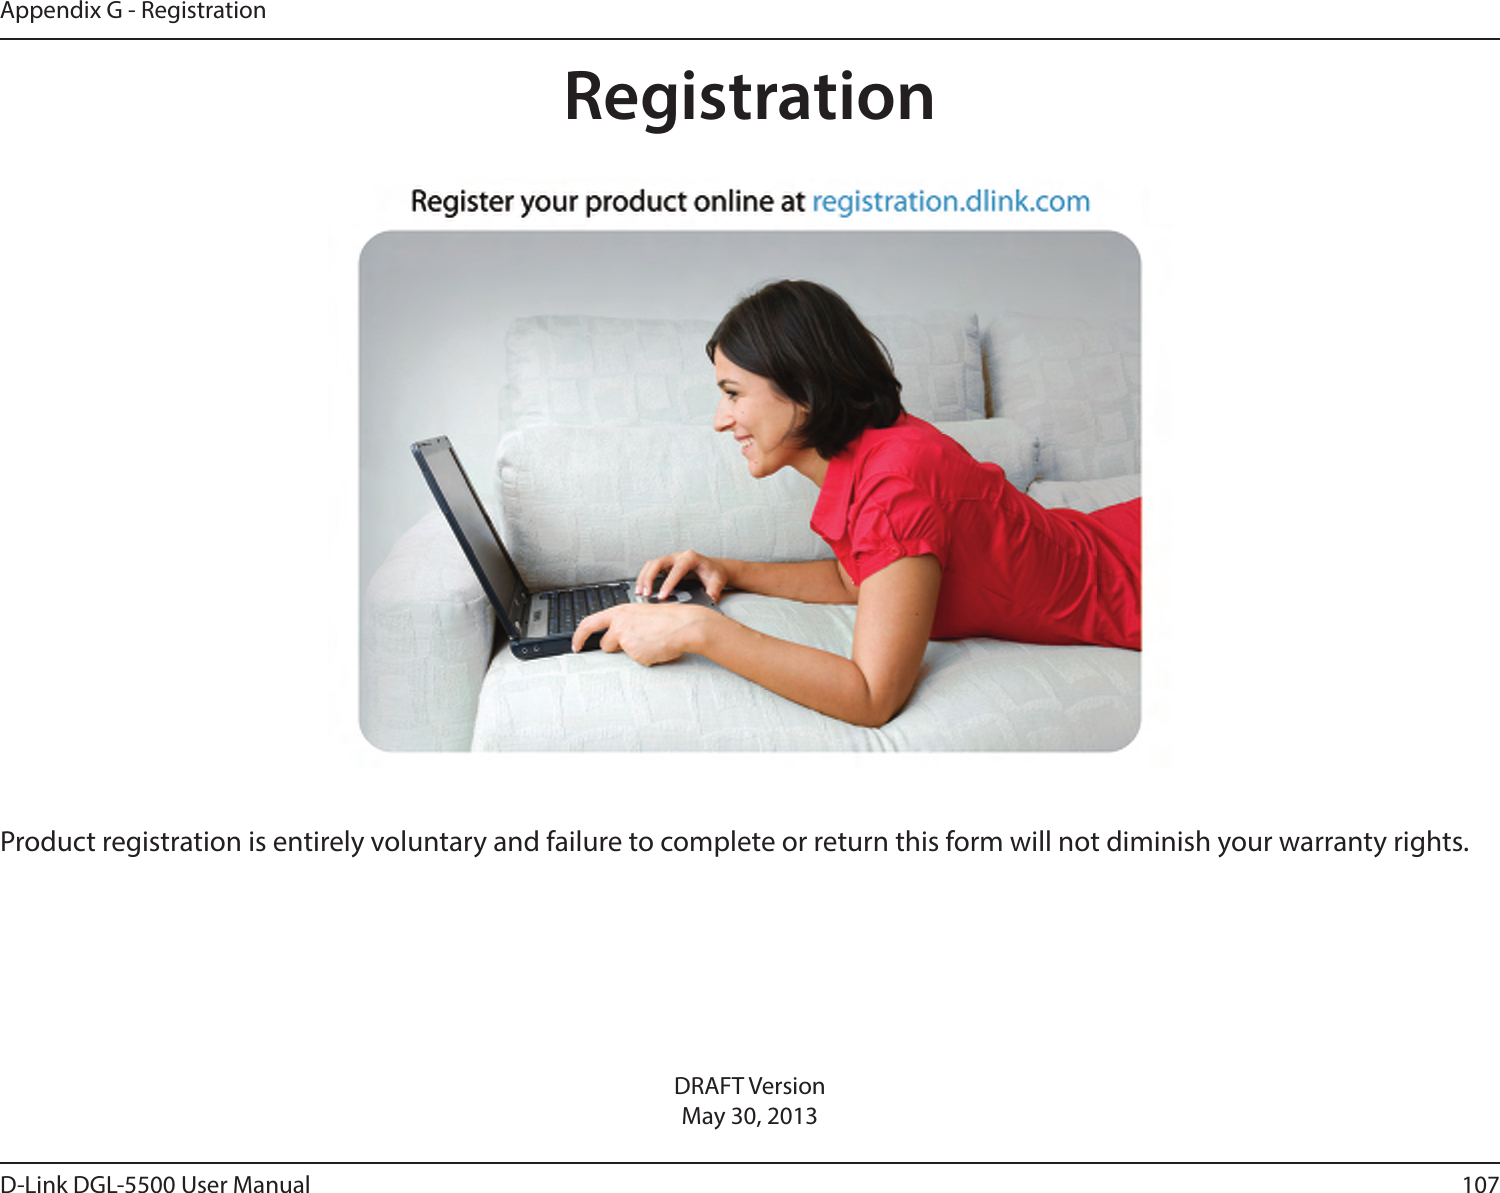 107D-Link DGL-5500 User ManualAppendix G - RegistrationDRAFT VersionMay 30, 2013Product registration is entirely voluntary and failure to complete or return this form will not diminish your warranty rights.Registration